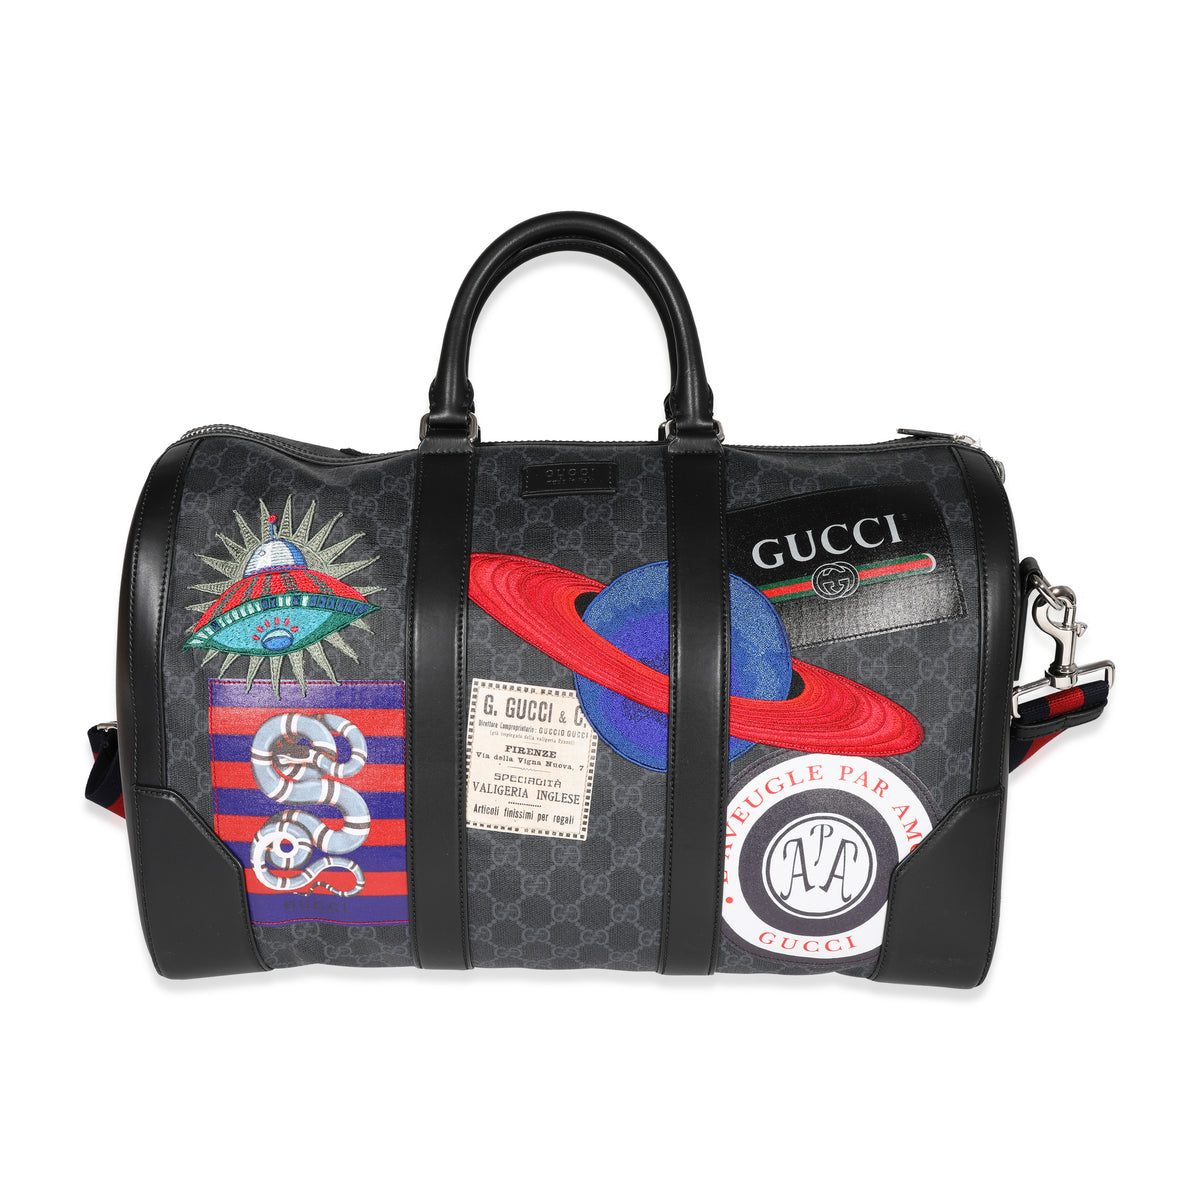 Gucci Black GG Supreme Canvas Night Courrier Carry-On-Duffle | myGemma ...